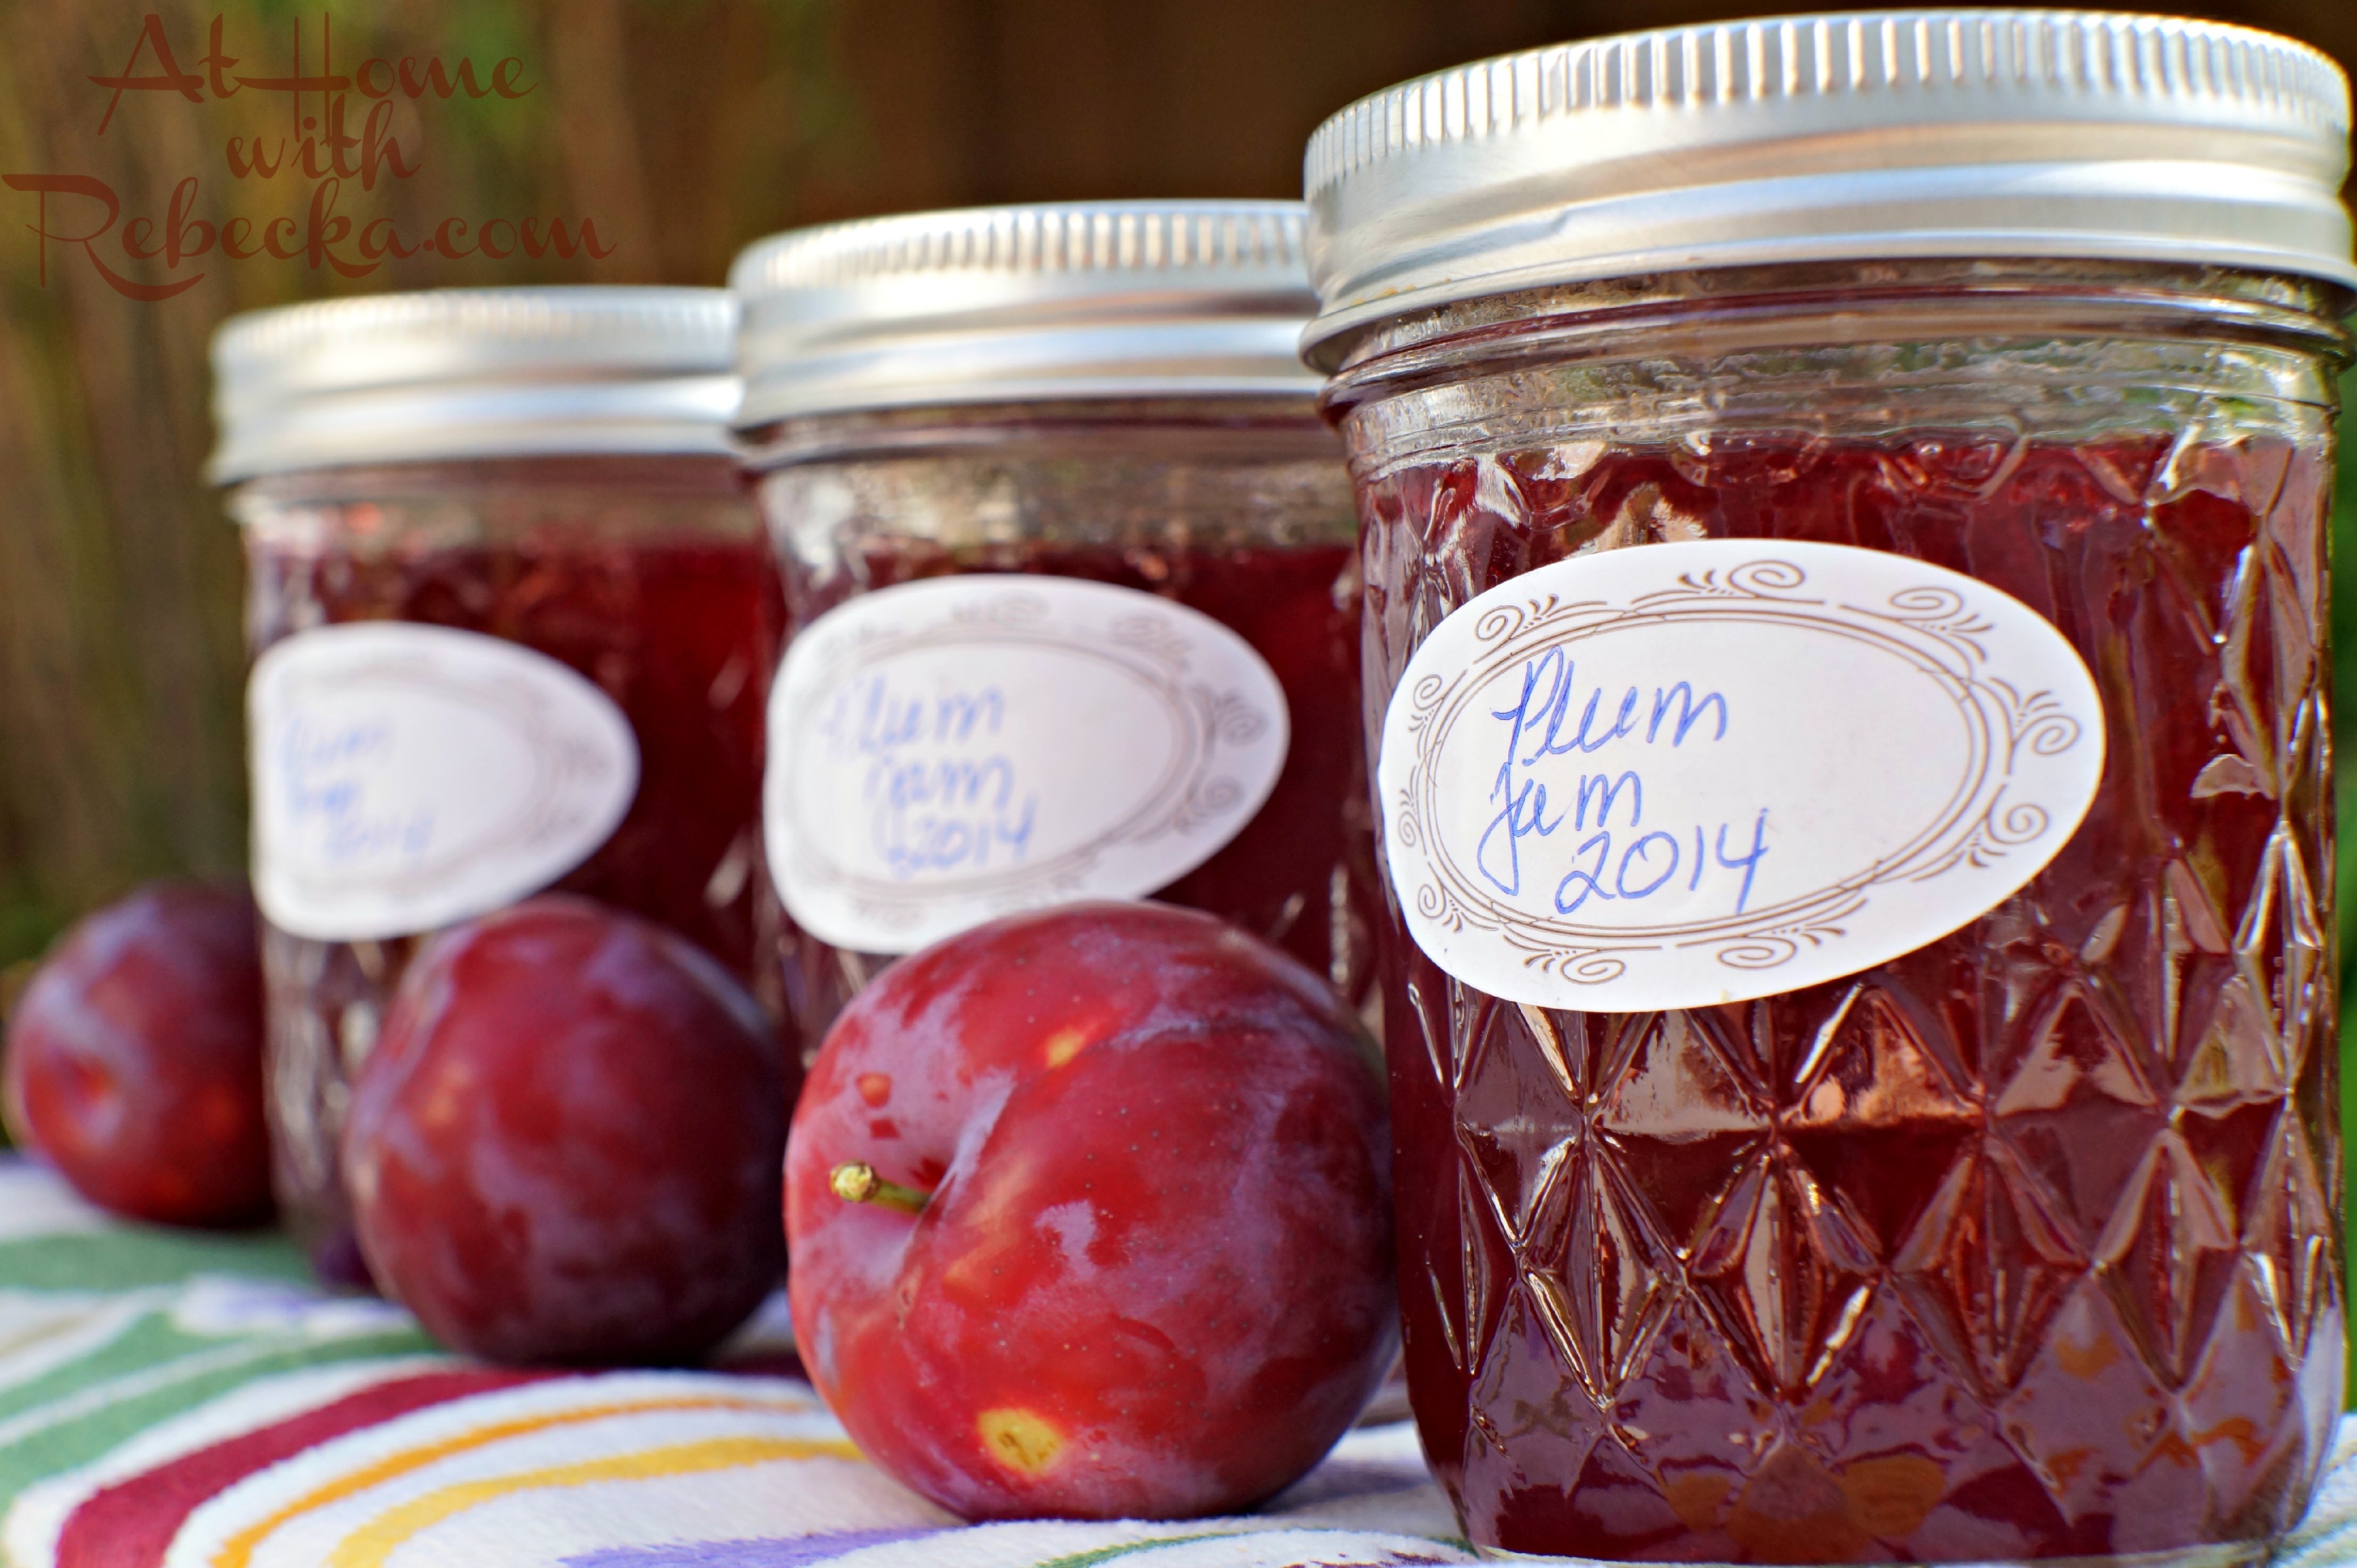 Canning plum jam is easy, fun, and leads to delicious plum recipes! Learning to can fresh plums will give you the opportunity to enjoy them all year long!